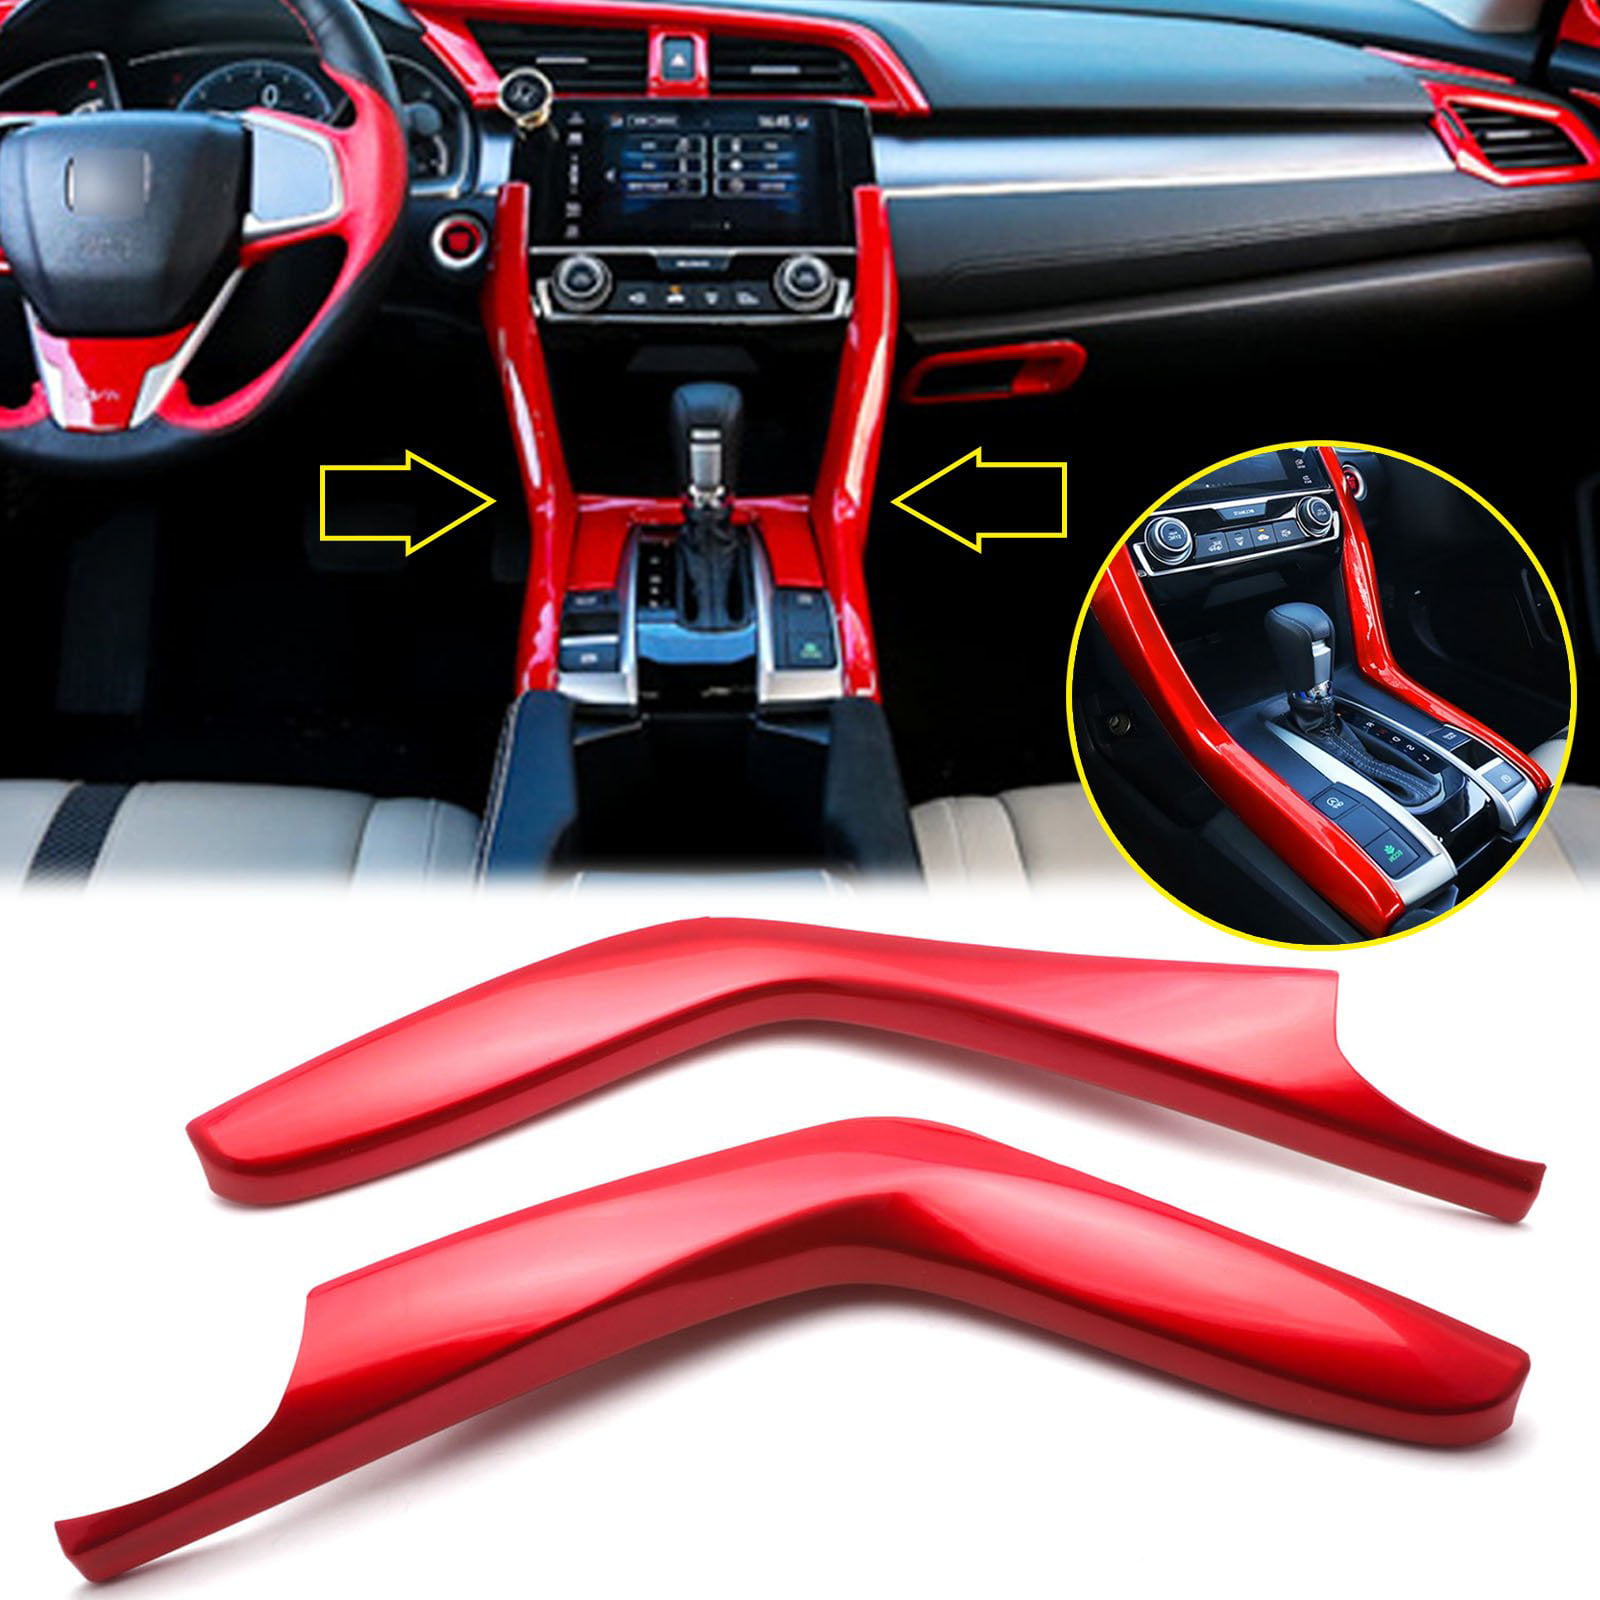 WINKA Dashboard Trim Cover Frame for 10th Gen Civic Interior Decoration Decal Accessories for Honda Civic 2020 2019 2018 2017 2016 Red 